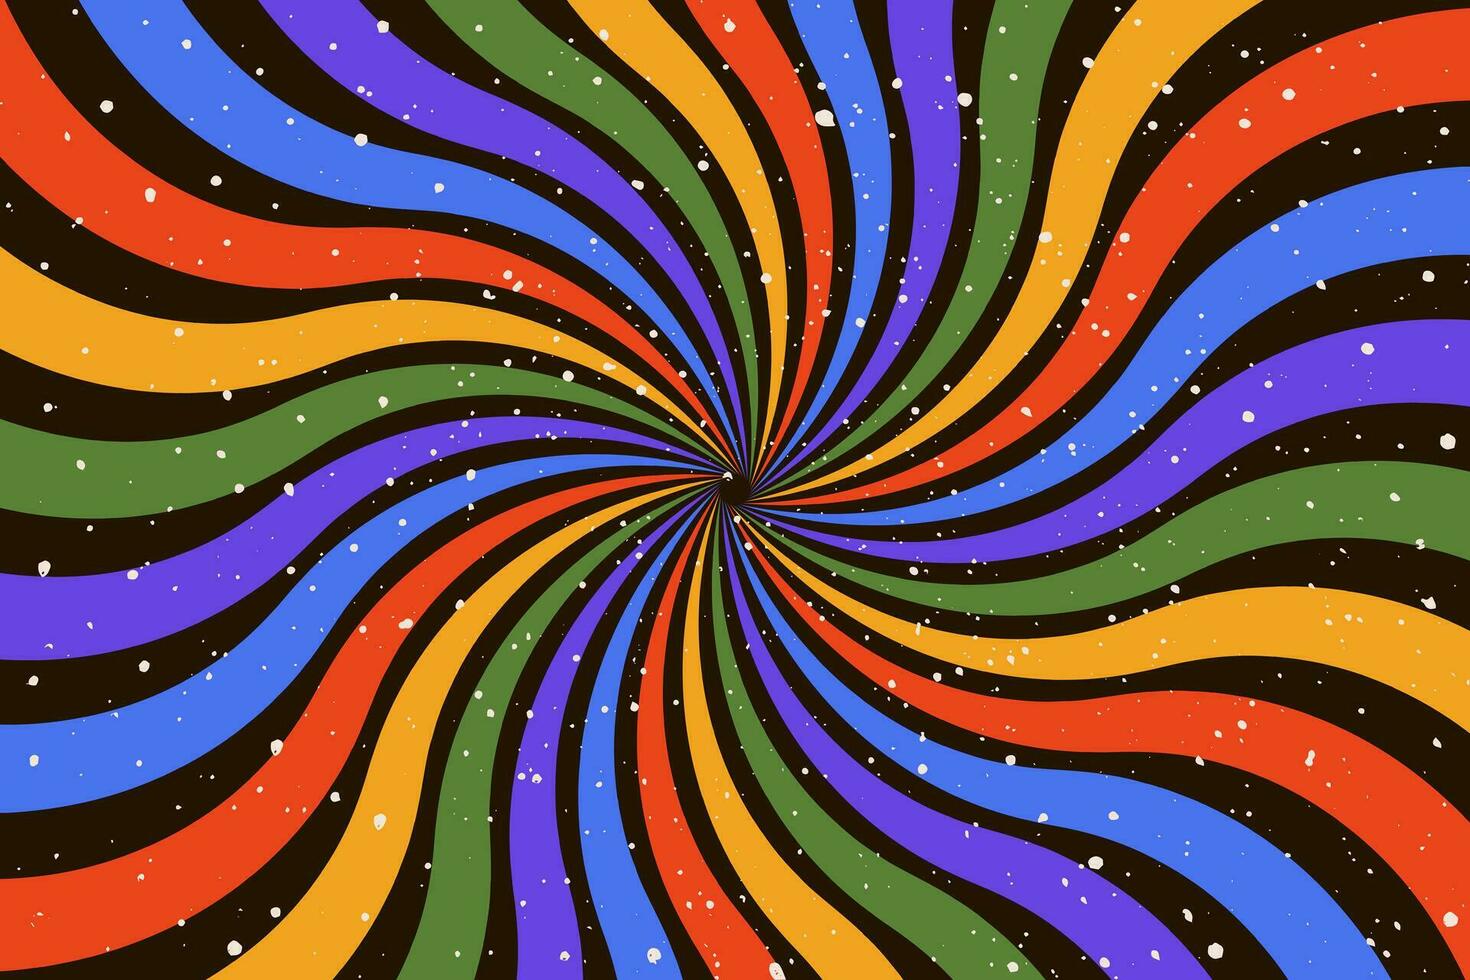 Groovy abstract rainbow swirl on black background. Retro design in 1960-1970s style. Vintage sunburst backdrop. Colorful summer hippie carnival vector illustration